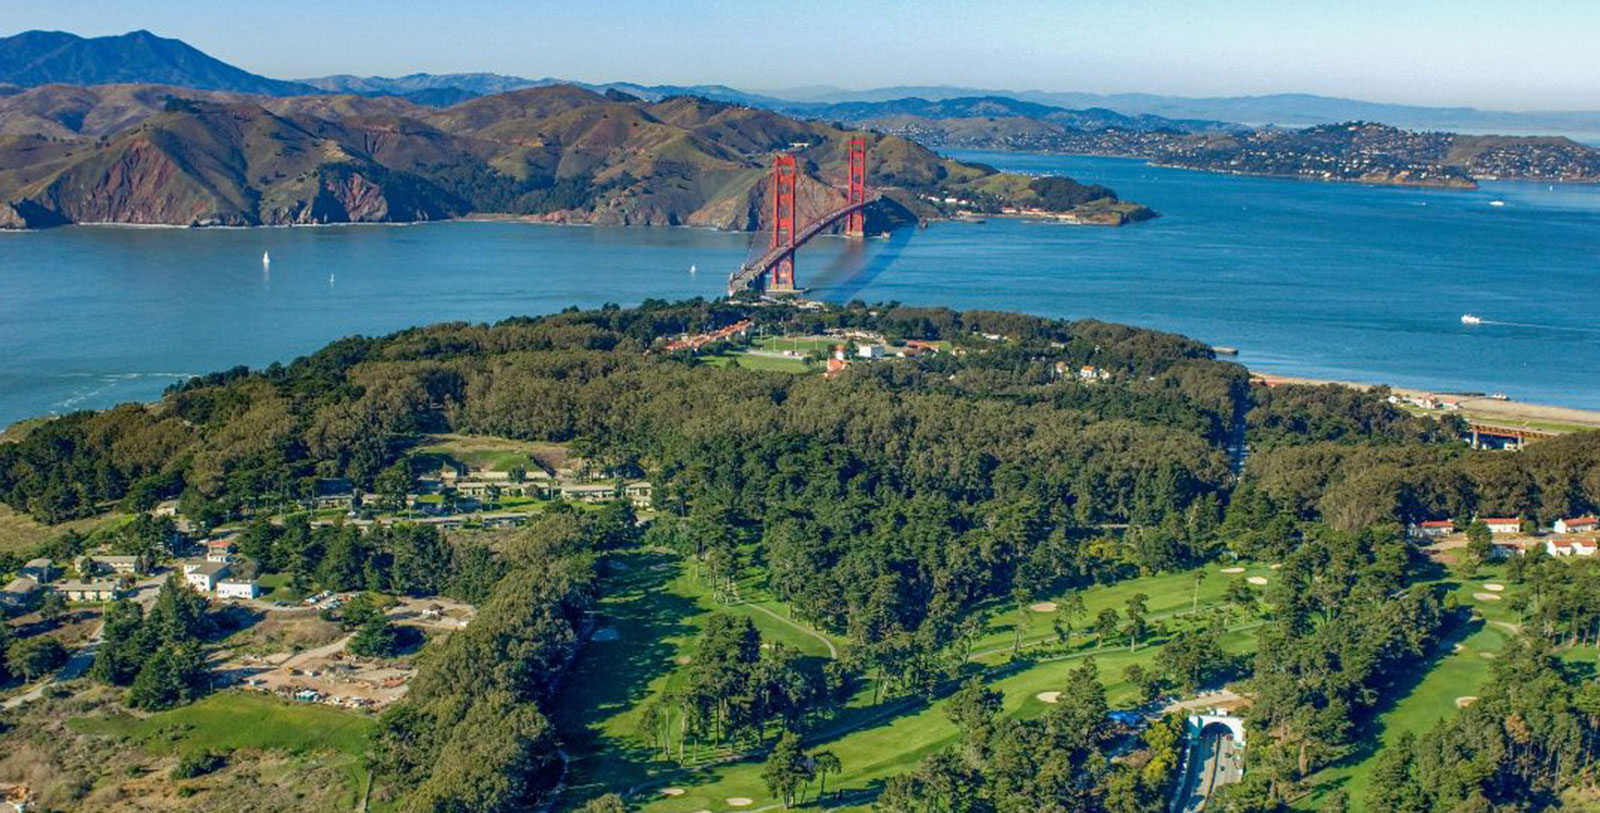 Located in the Presidio of San Francisco, a beautiful national park and National Historic Landmark at the Golden Gate.